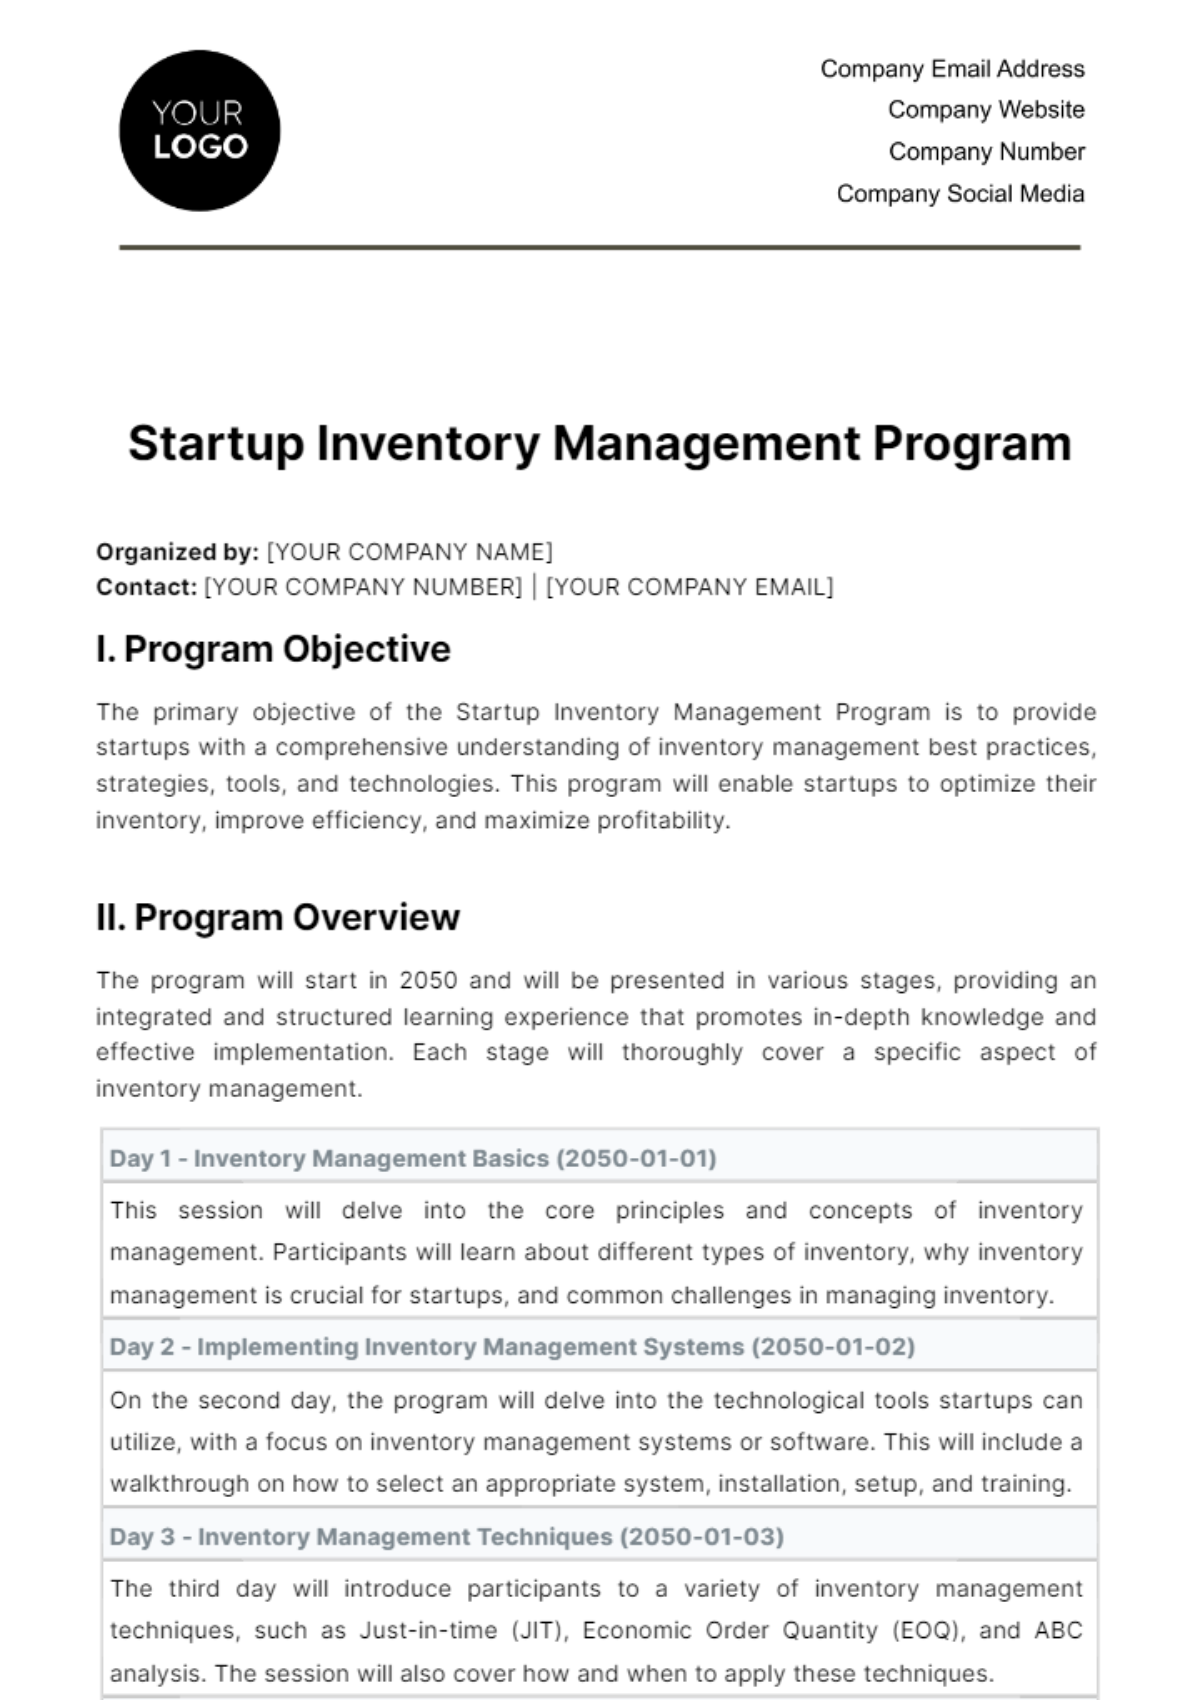 Free Startup Inventory Management Program Template